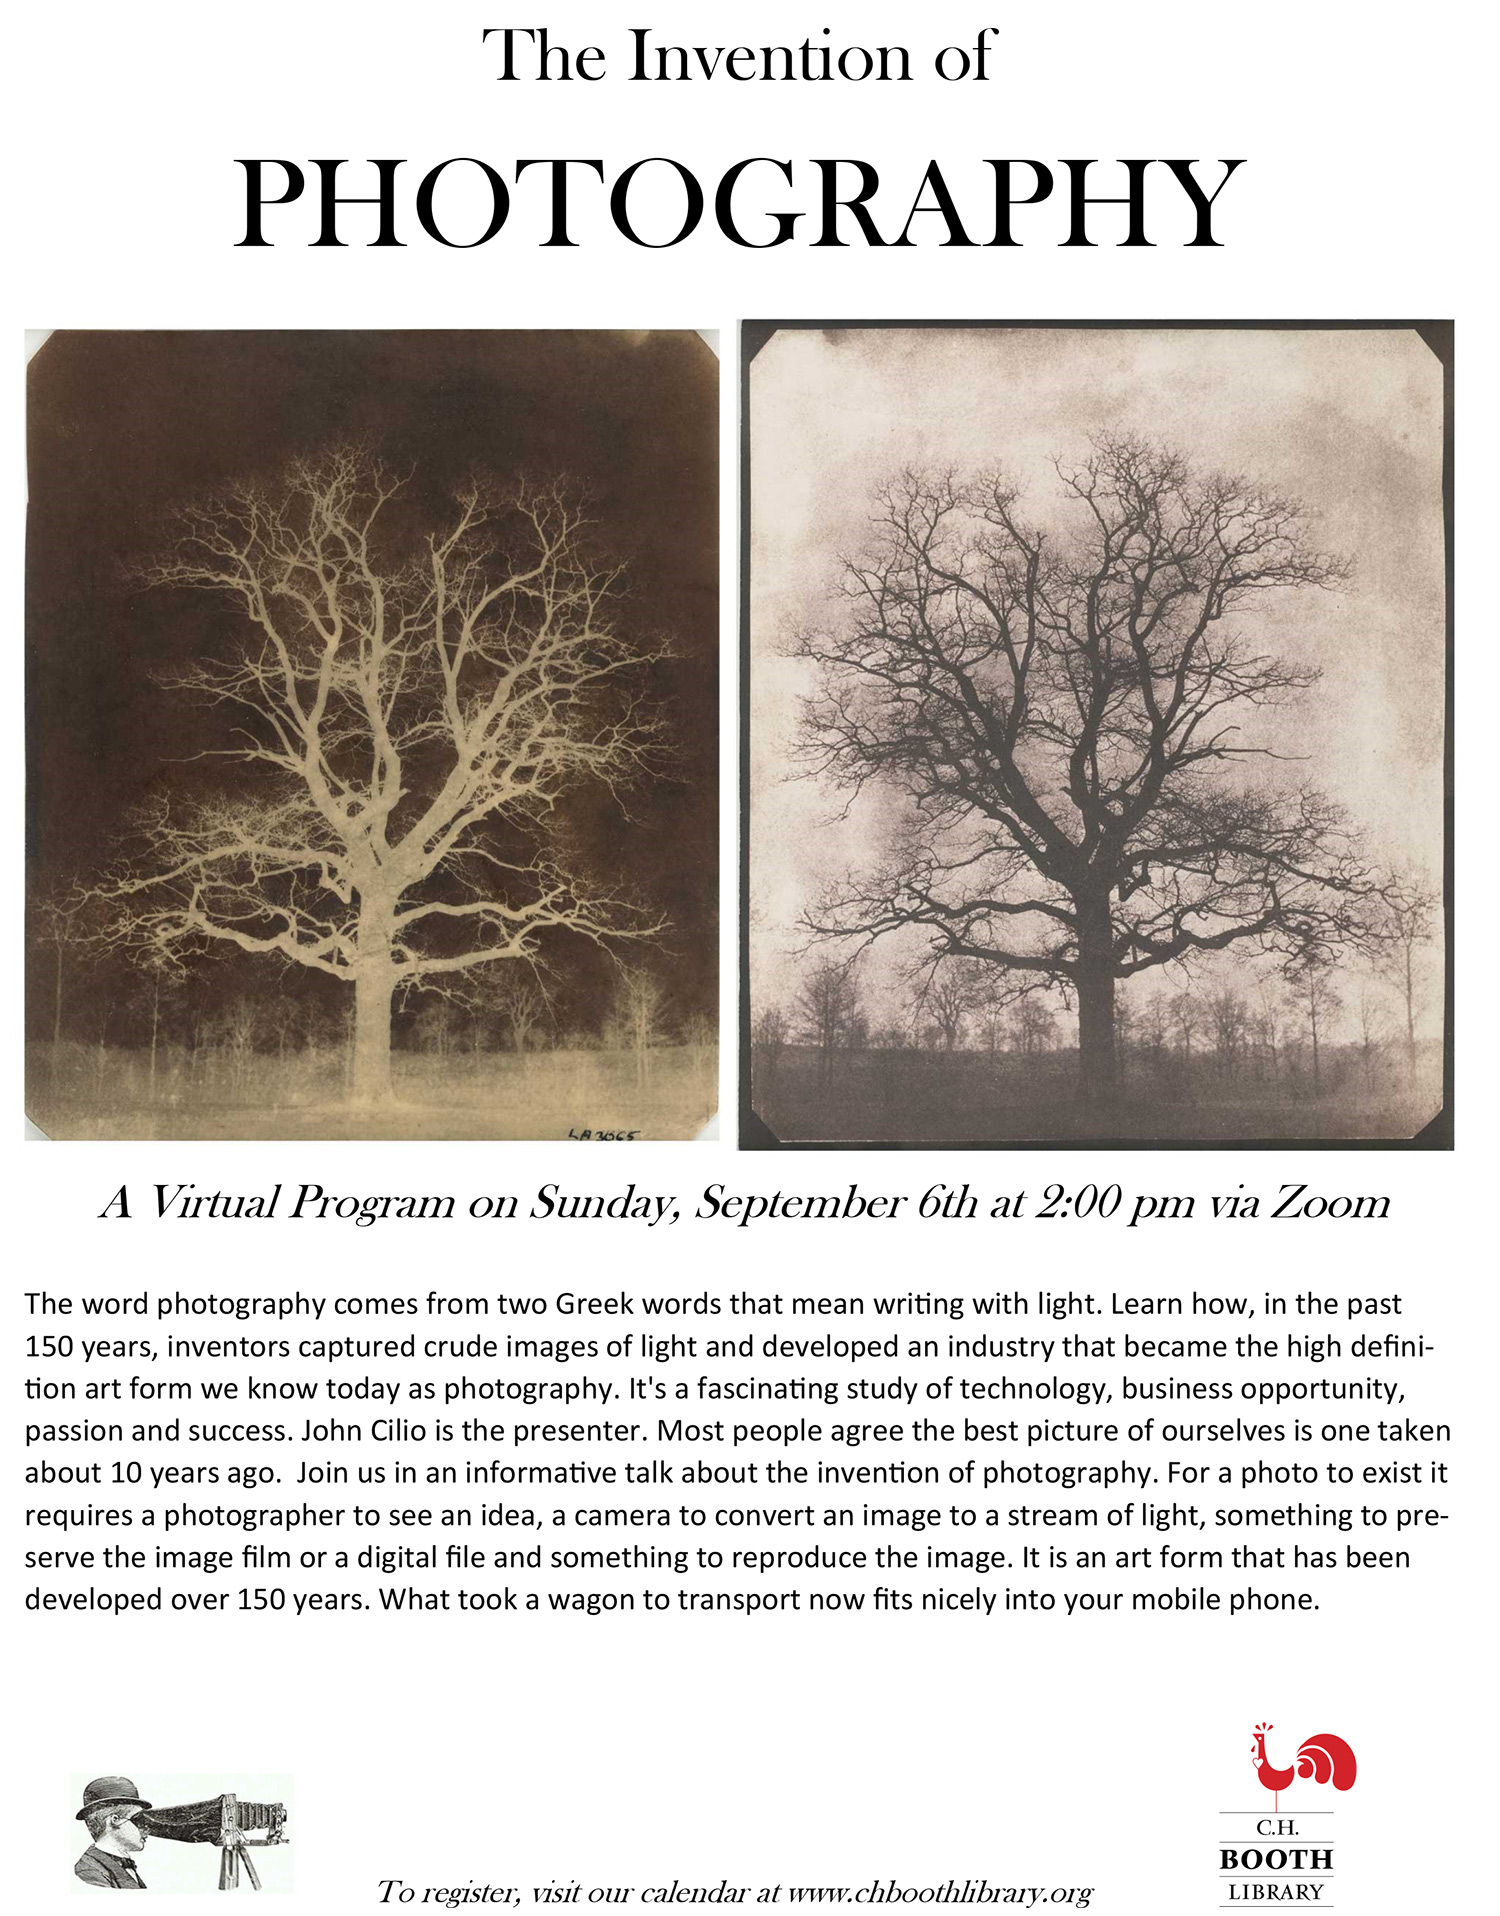 Sep 13 – Free Virtual Partner Program – “The Invention of Photography”